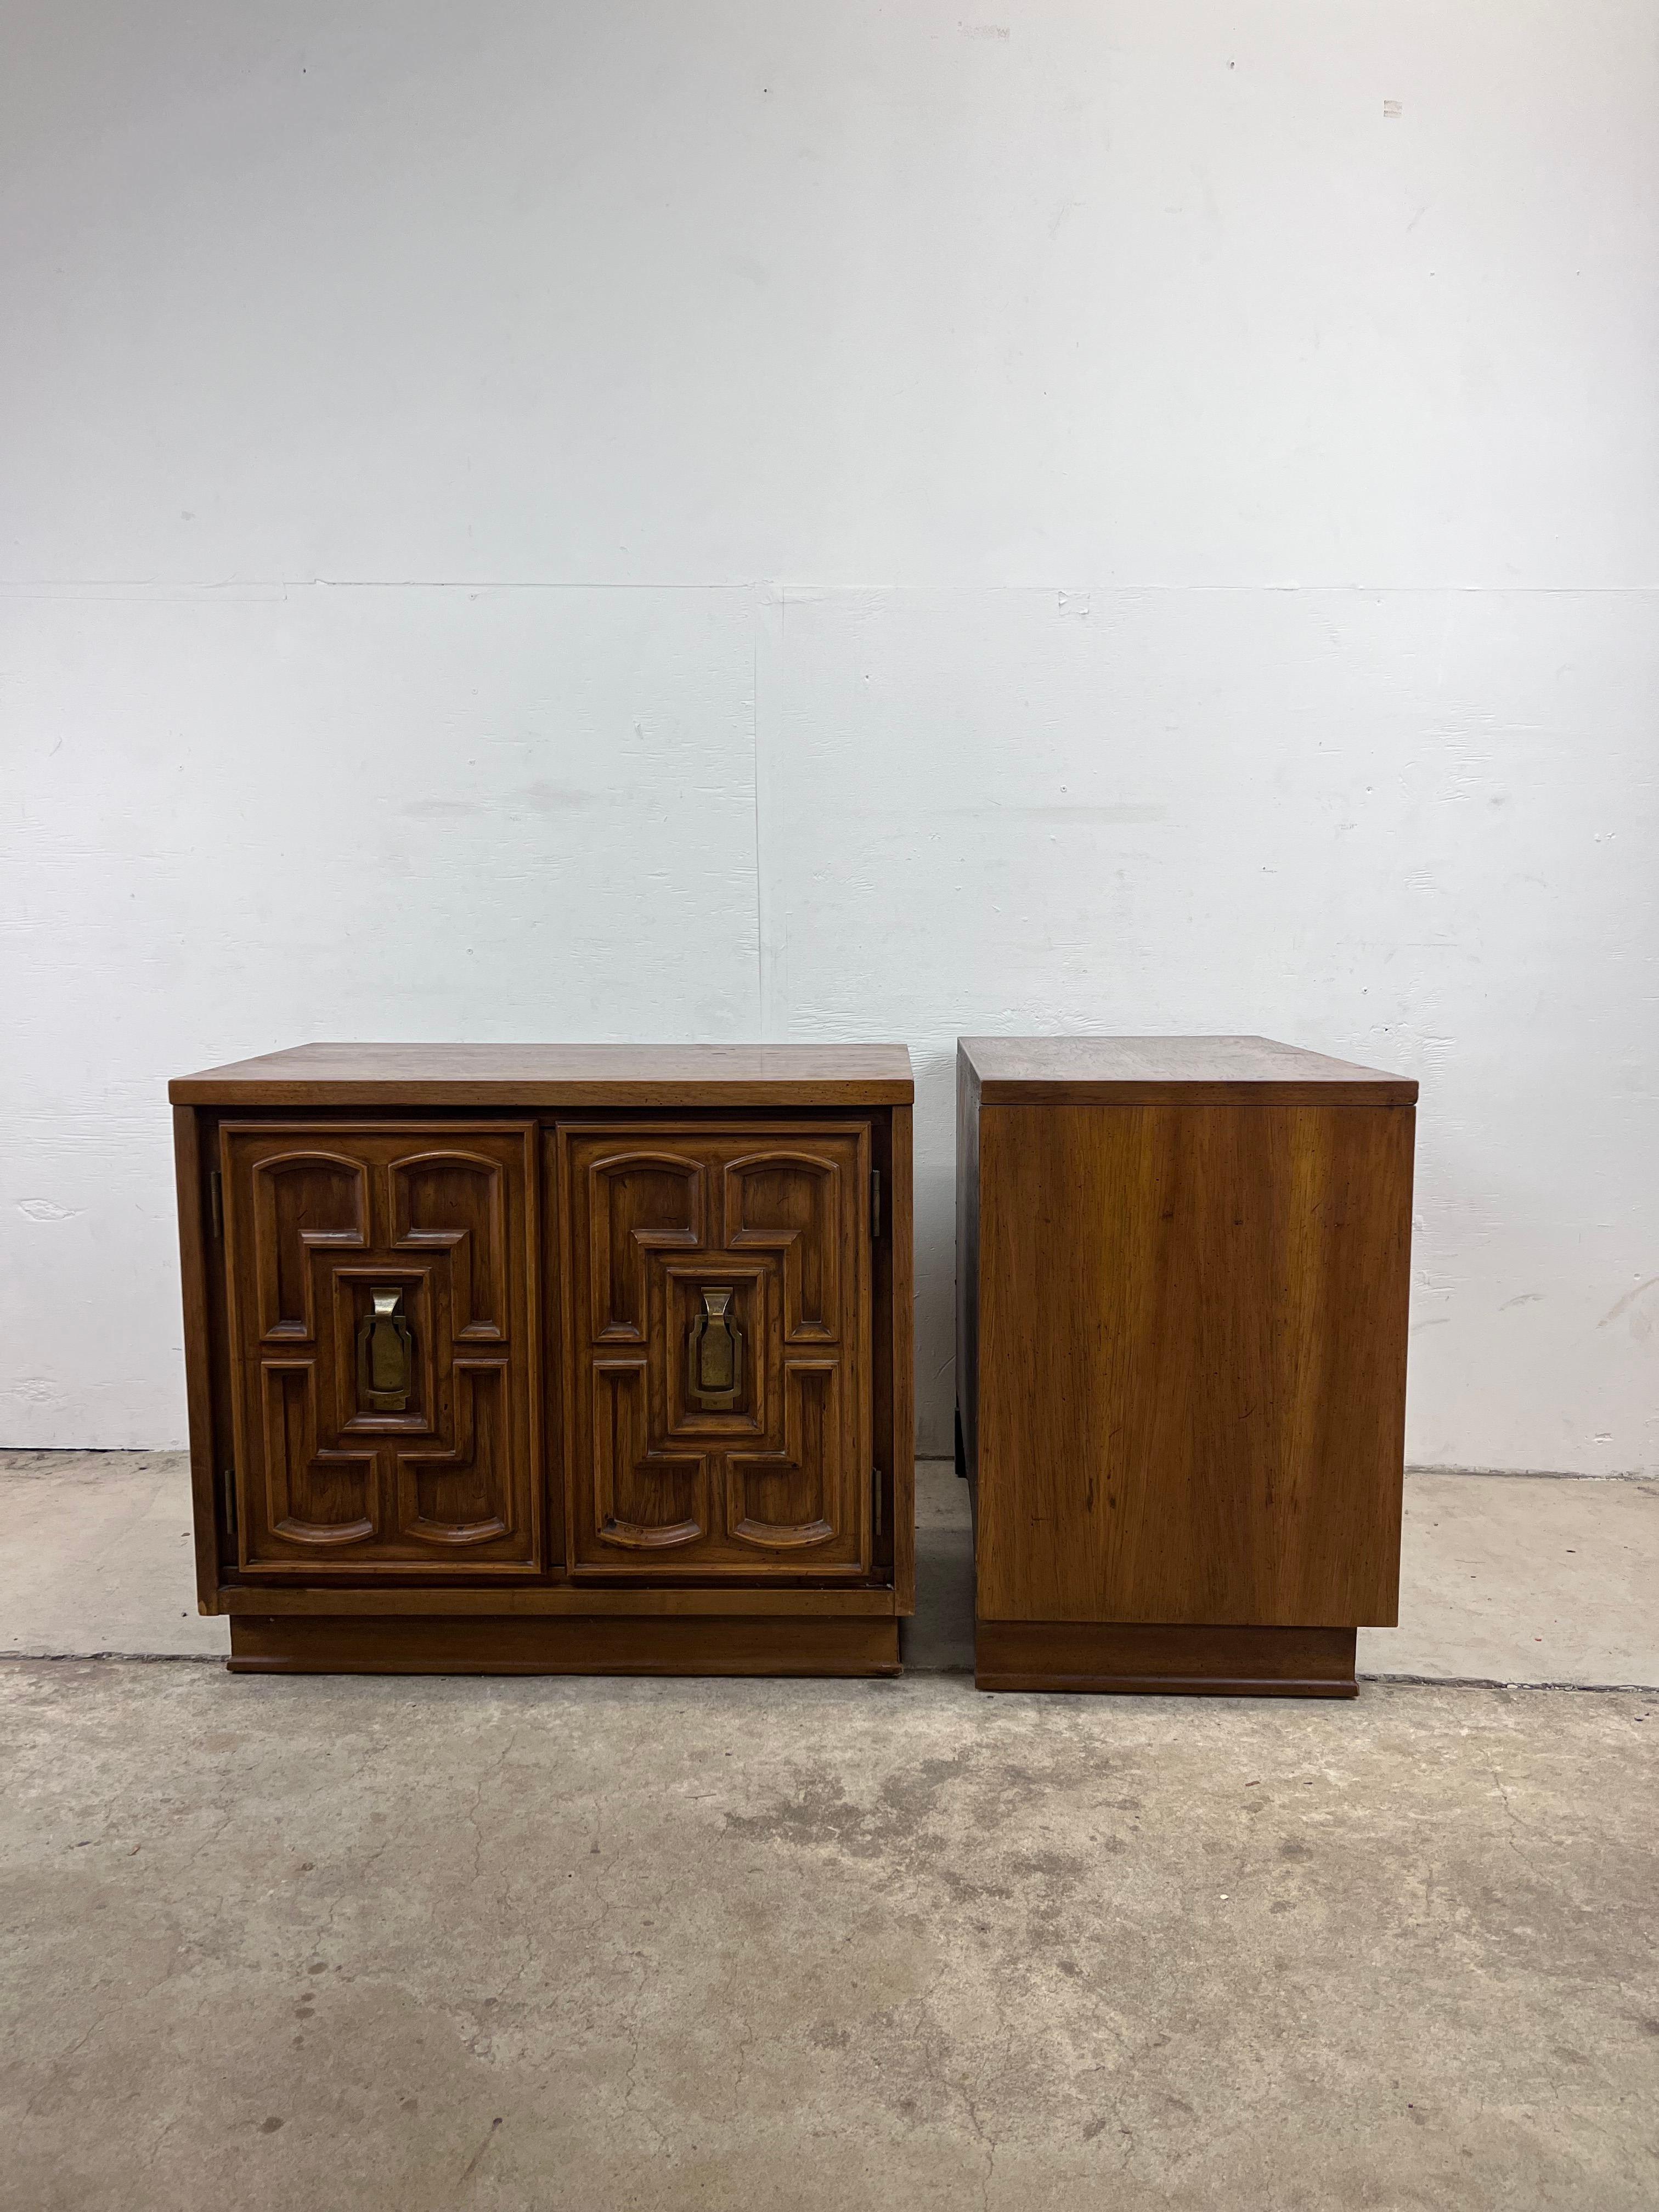 Pair of Mid Century Spanish Revival End Table Cabinets by Bassett 1